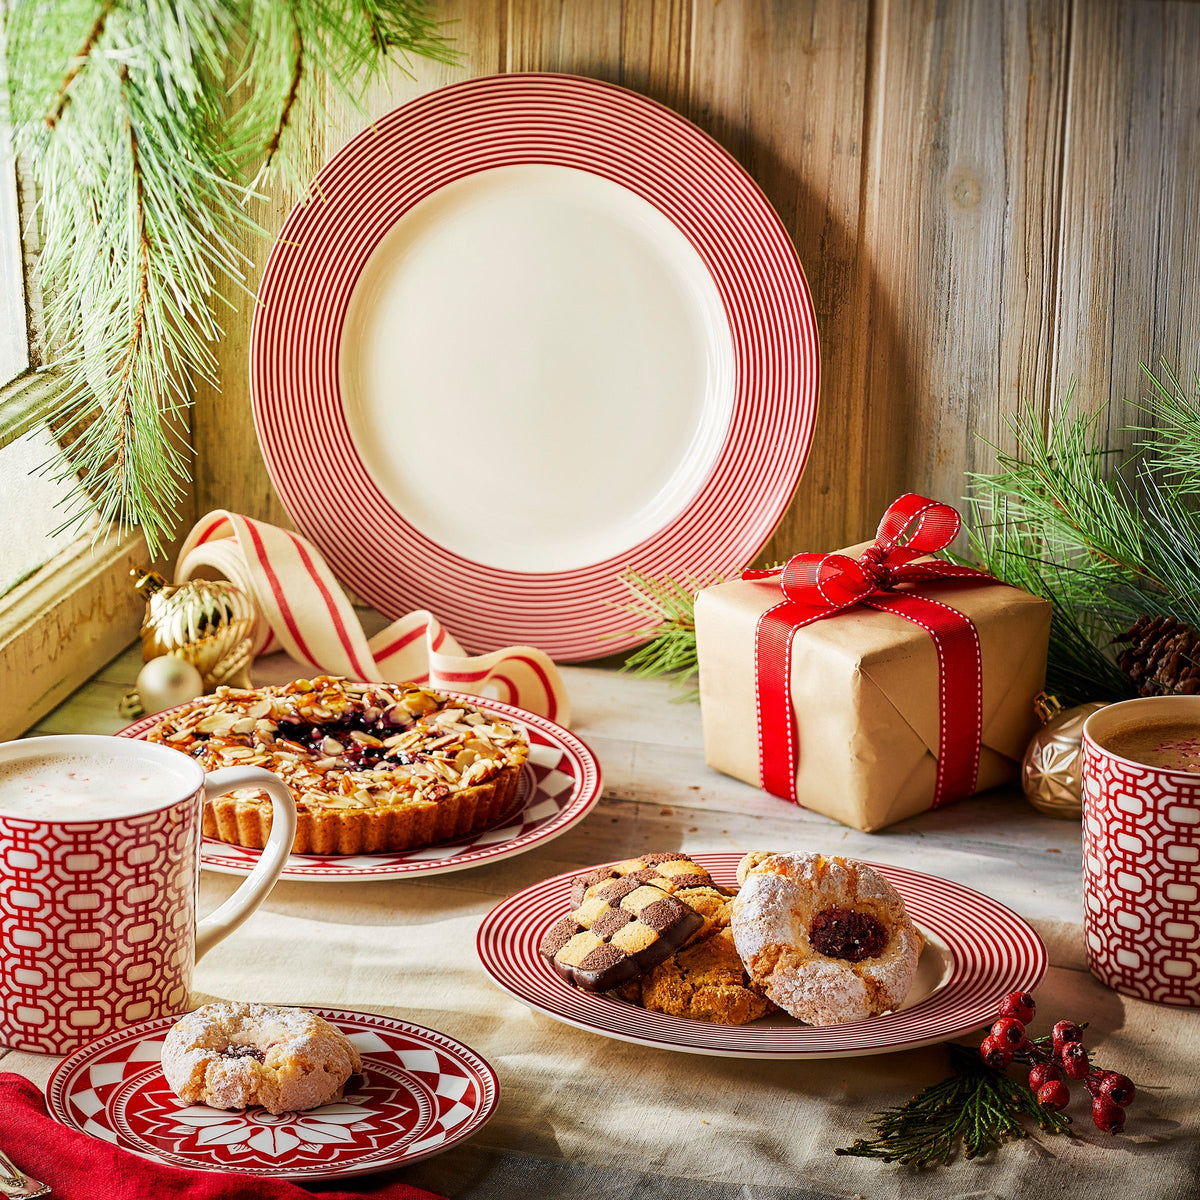 A Newport Stripe Crimson Dinner Plate with food and a gift on it, made of Caskata Artisanal Home premium porcelain dinnerware.